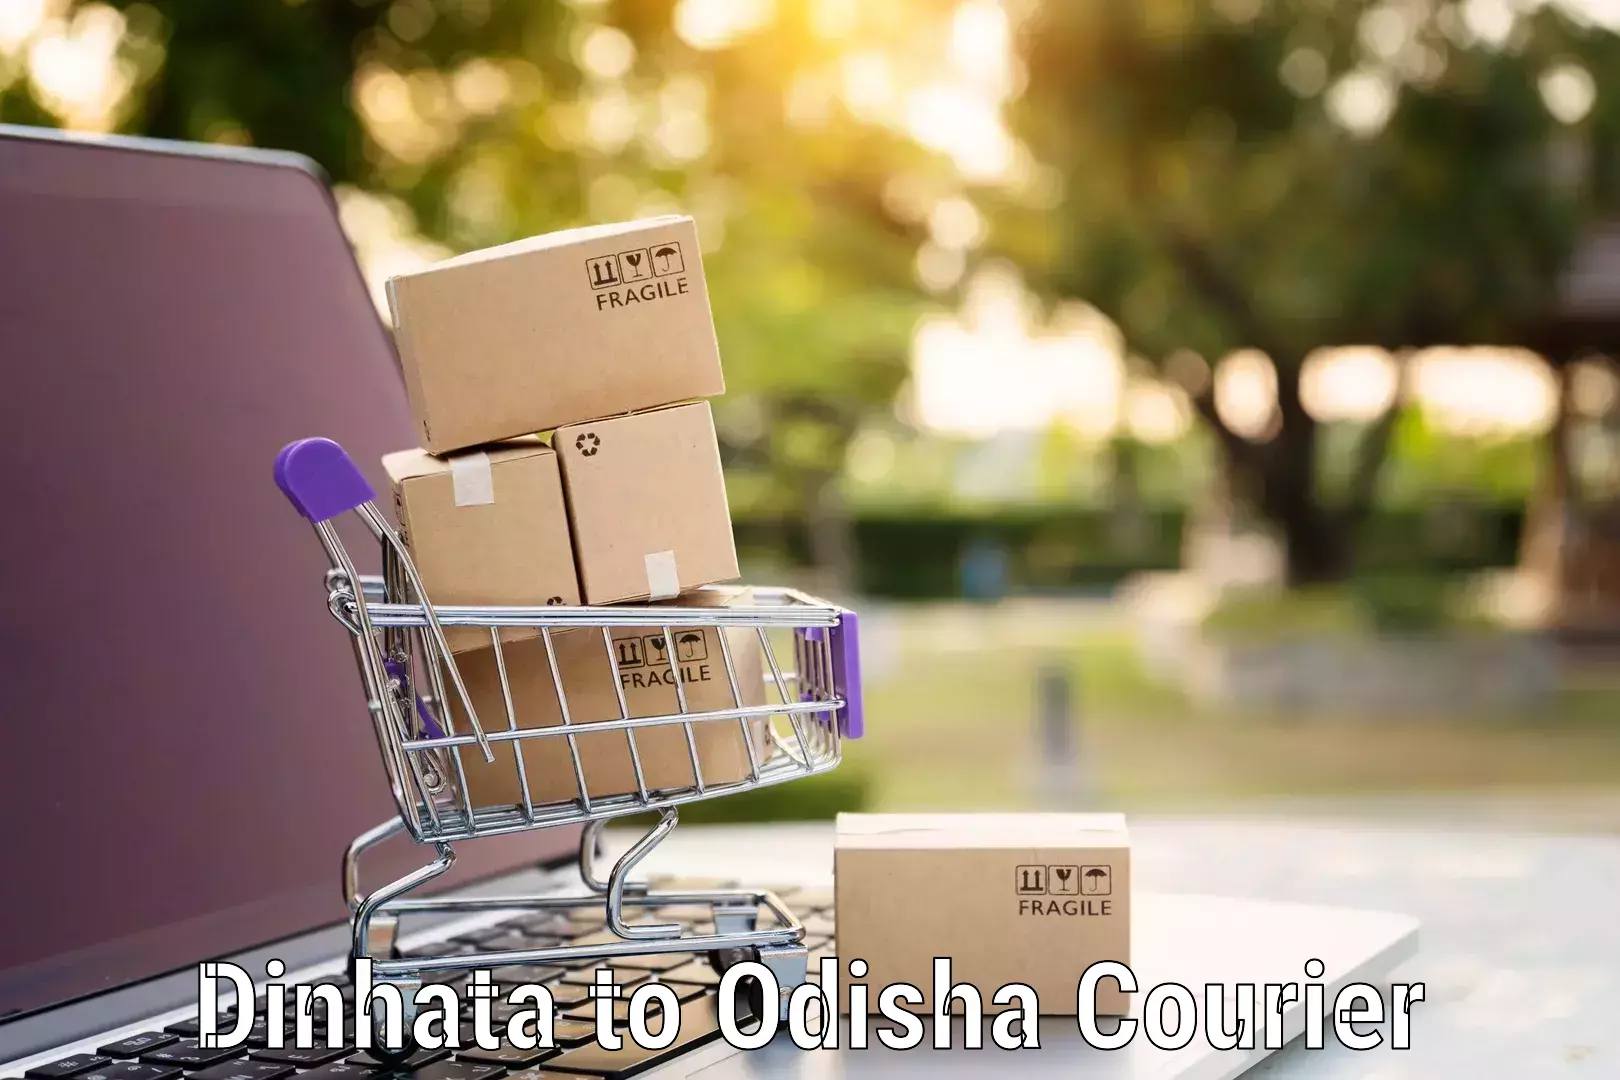 Moving and handling services in Dinhata to Odisha